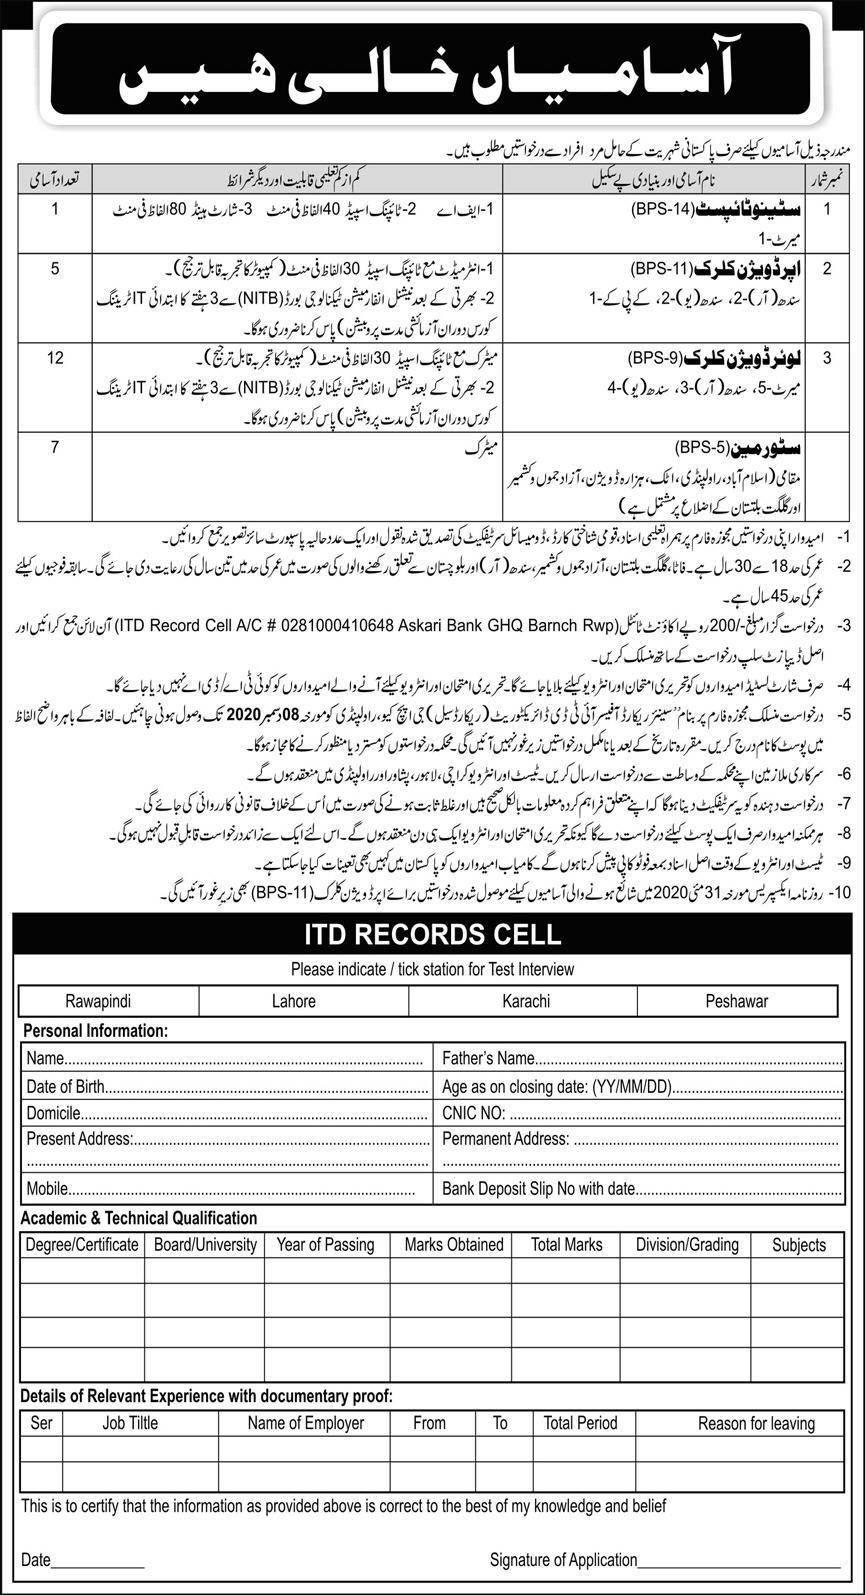 Pak Army Pakistan Jobs in ITD Records Cell